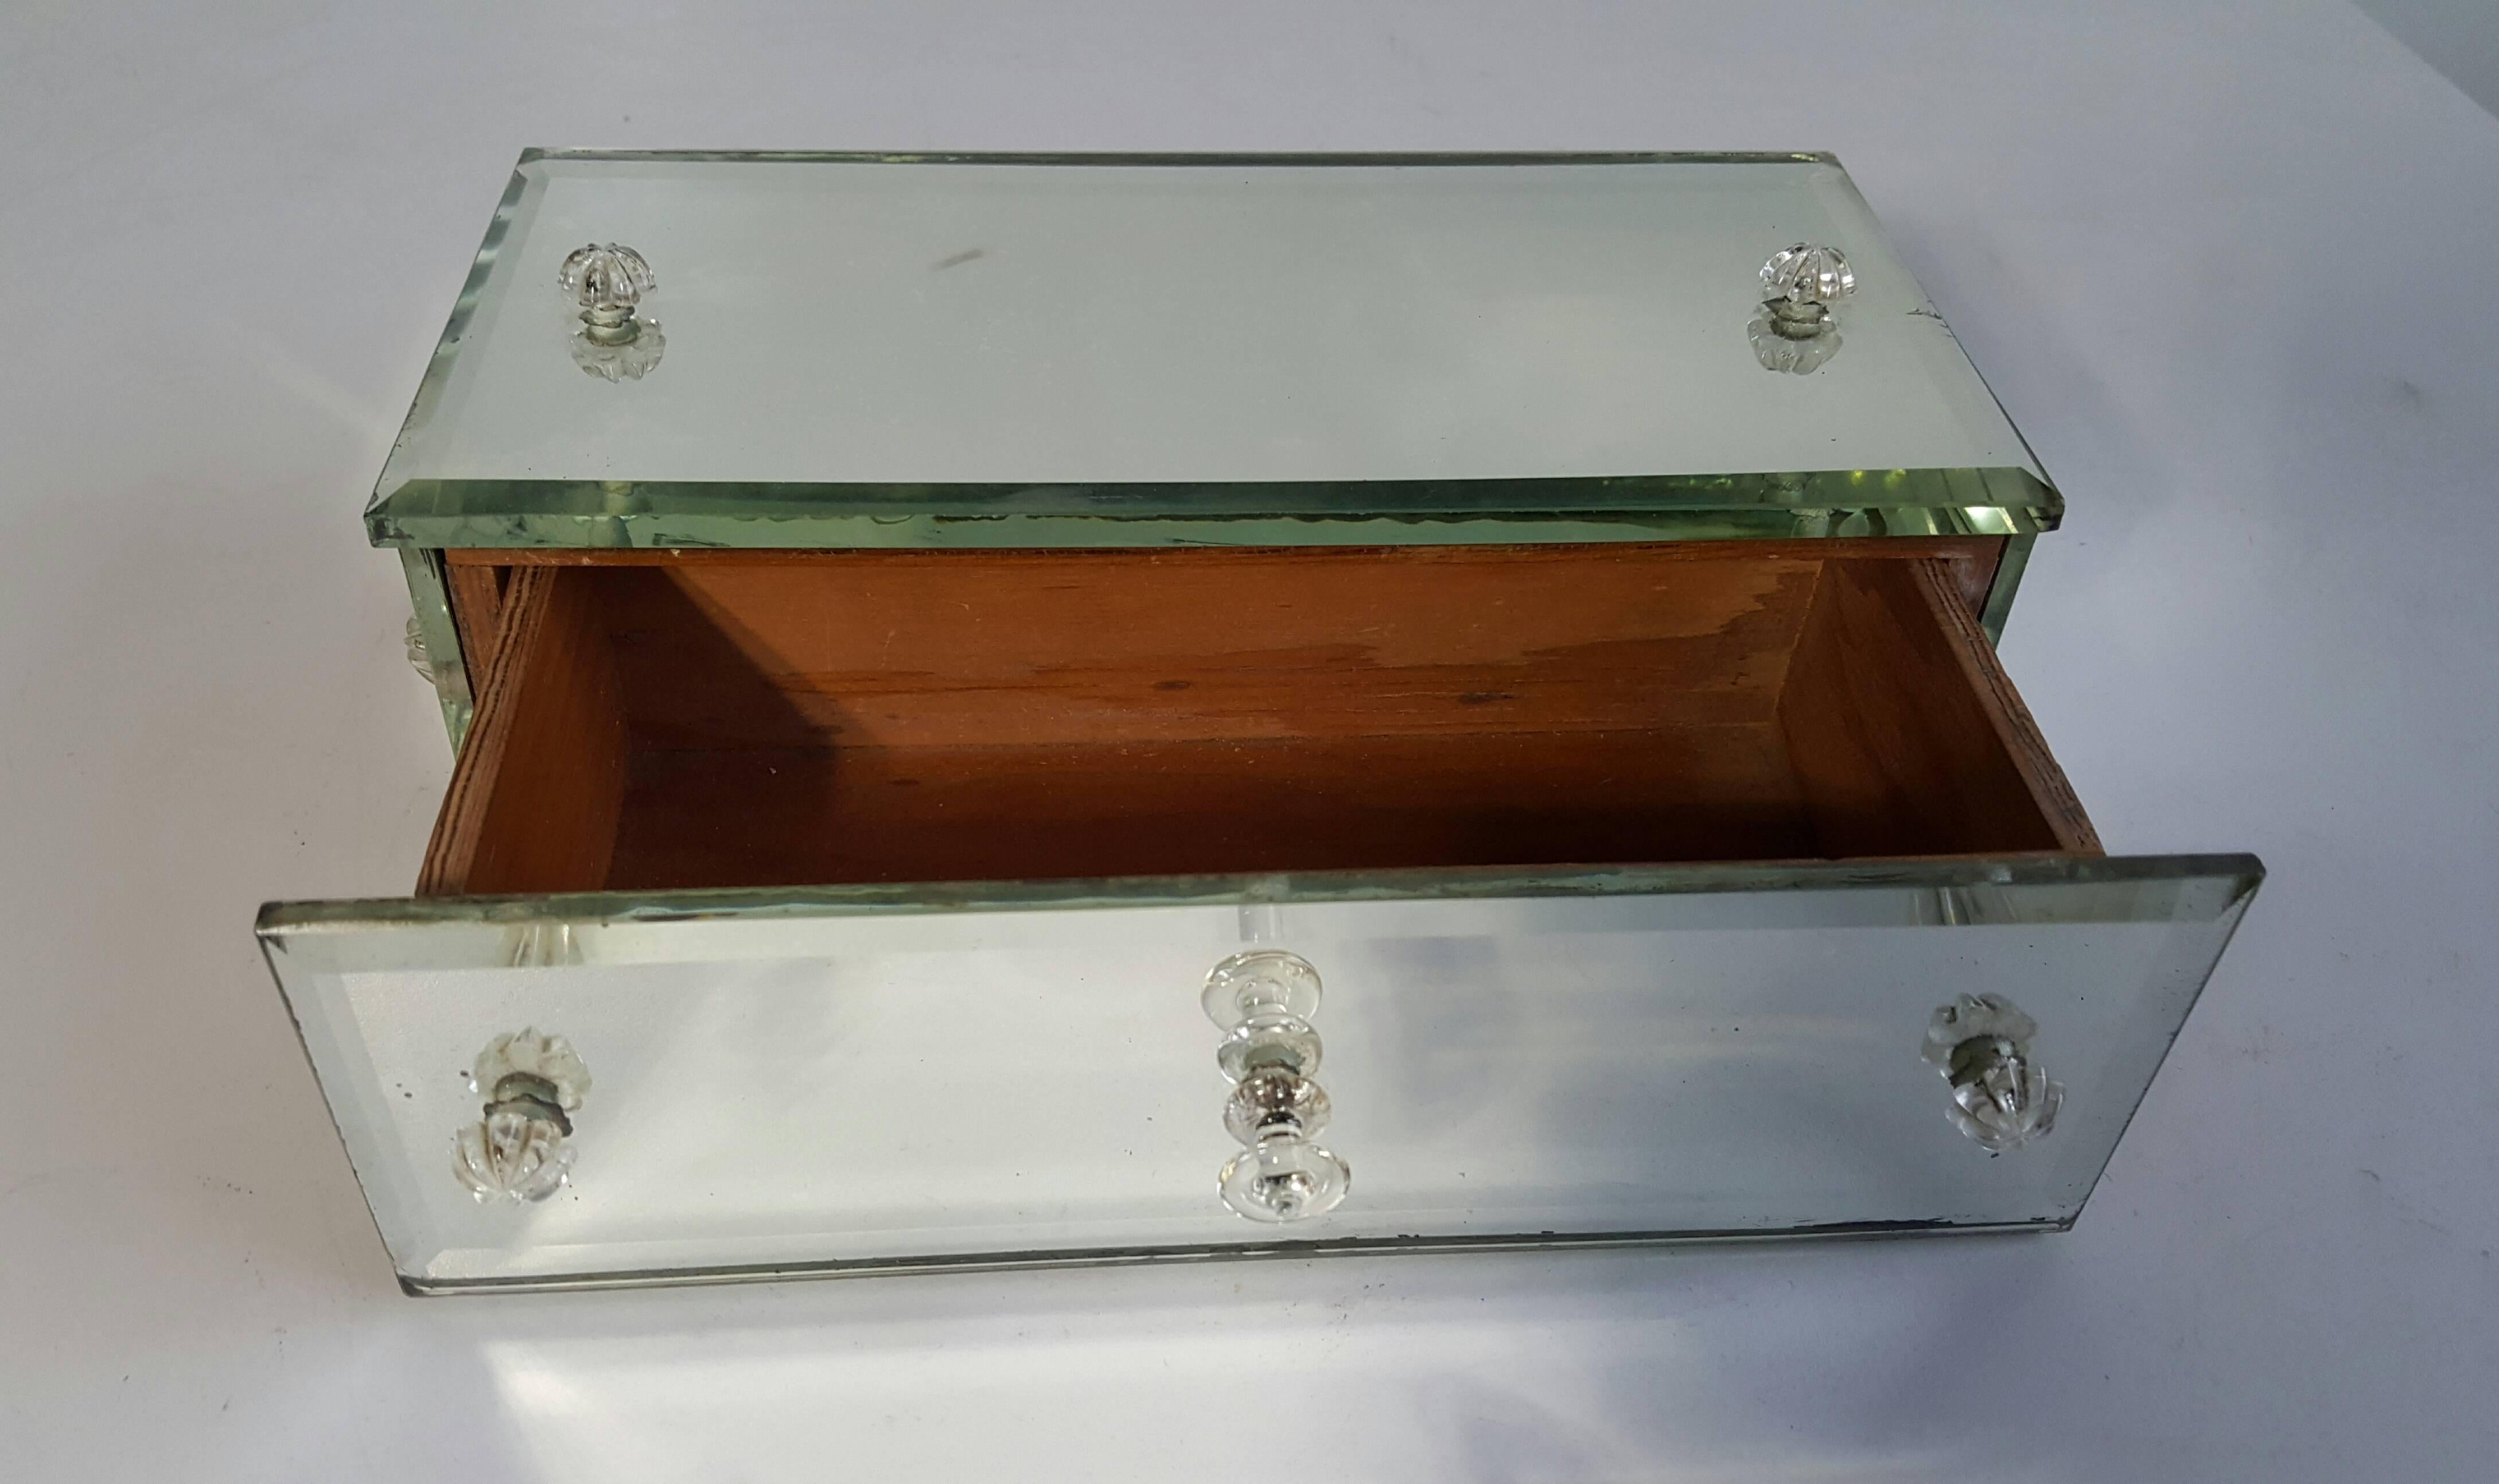 Charming little mirrored trinket / jewelry box, beveled mirror to all five sides as well as cut-glass pull and accents. Classic 1940s dresser accessory.